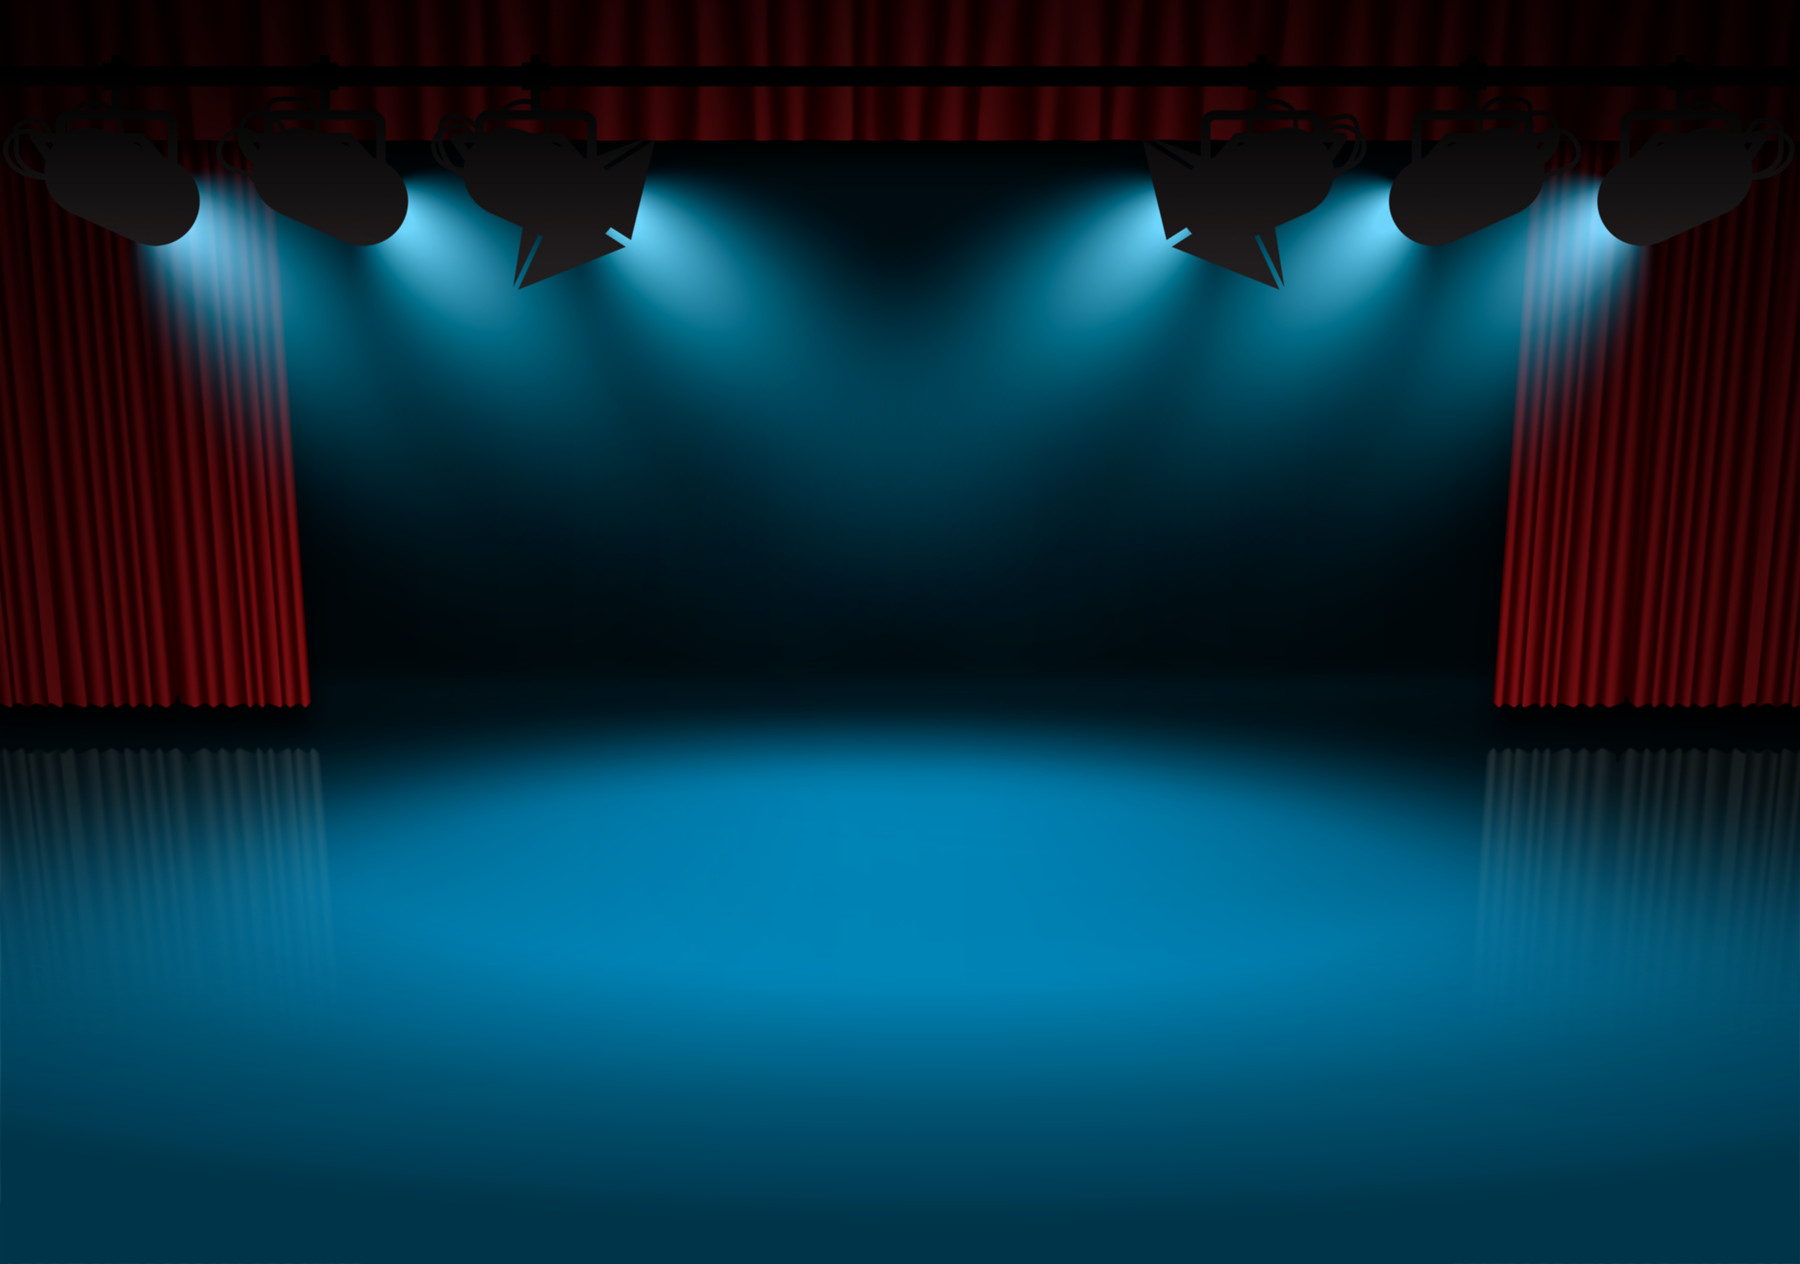 Free seats on the. Background clipart stage